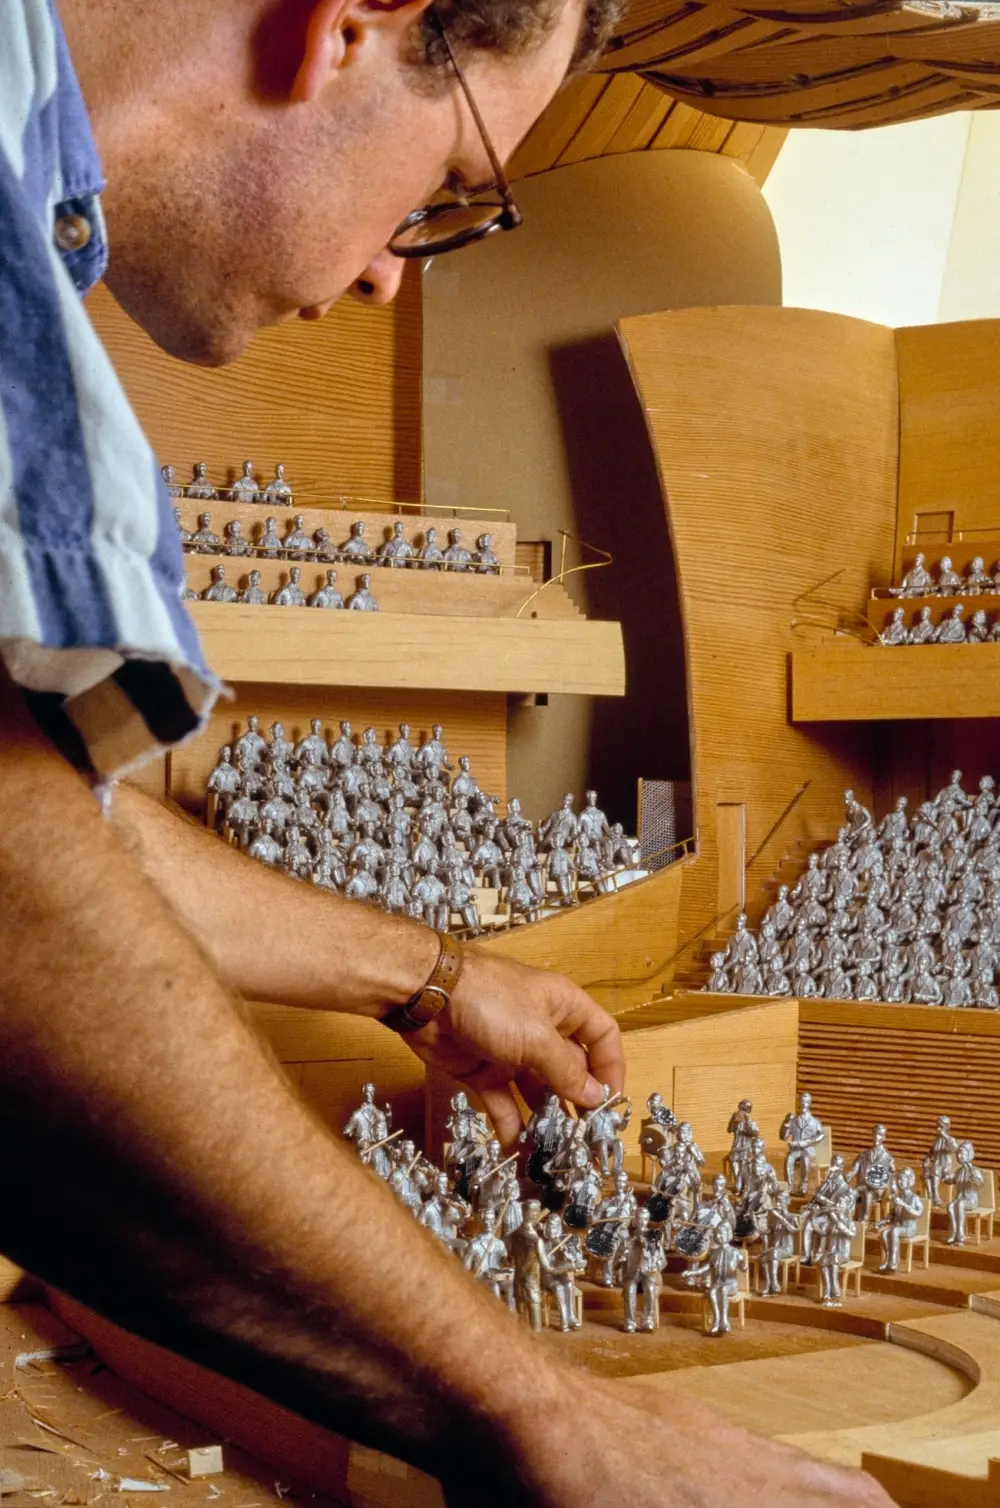 A person adjusts a figurine within a scale model of the Walt Disney Concert Hall interior.